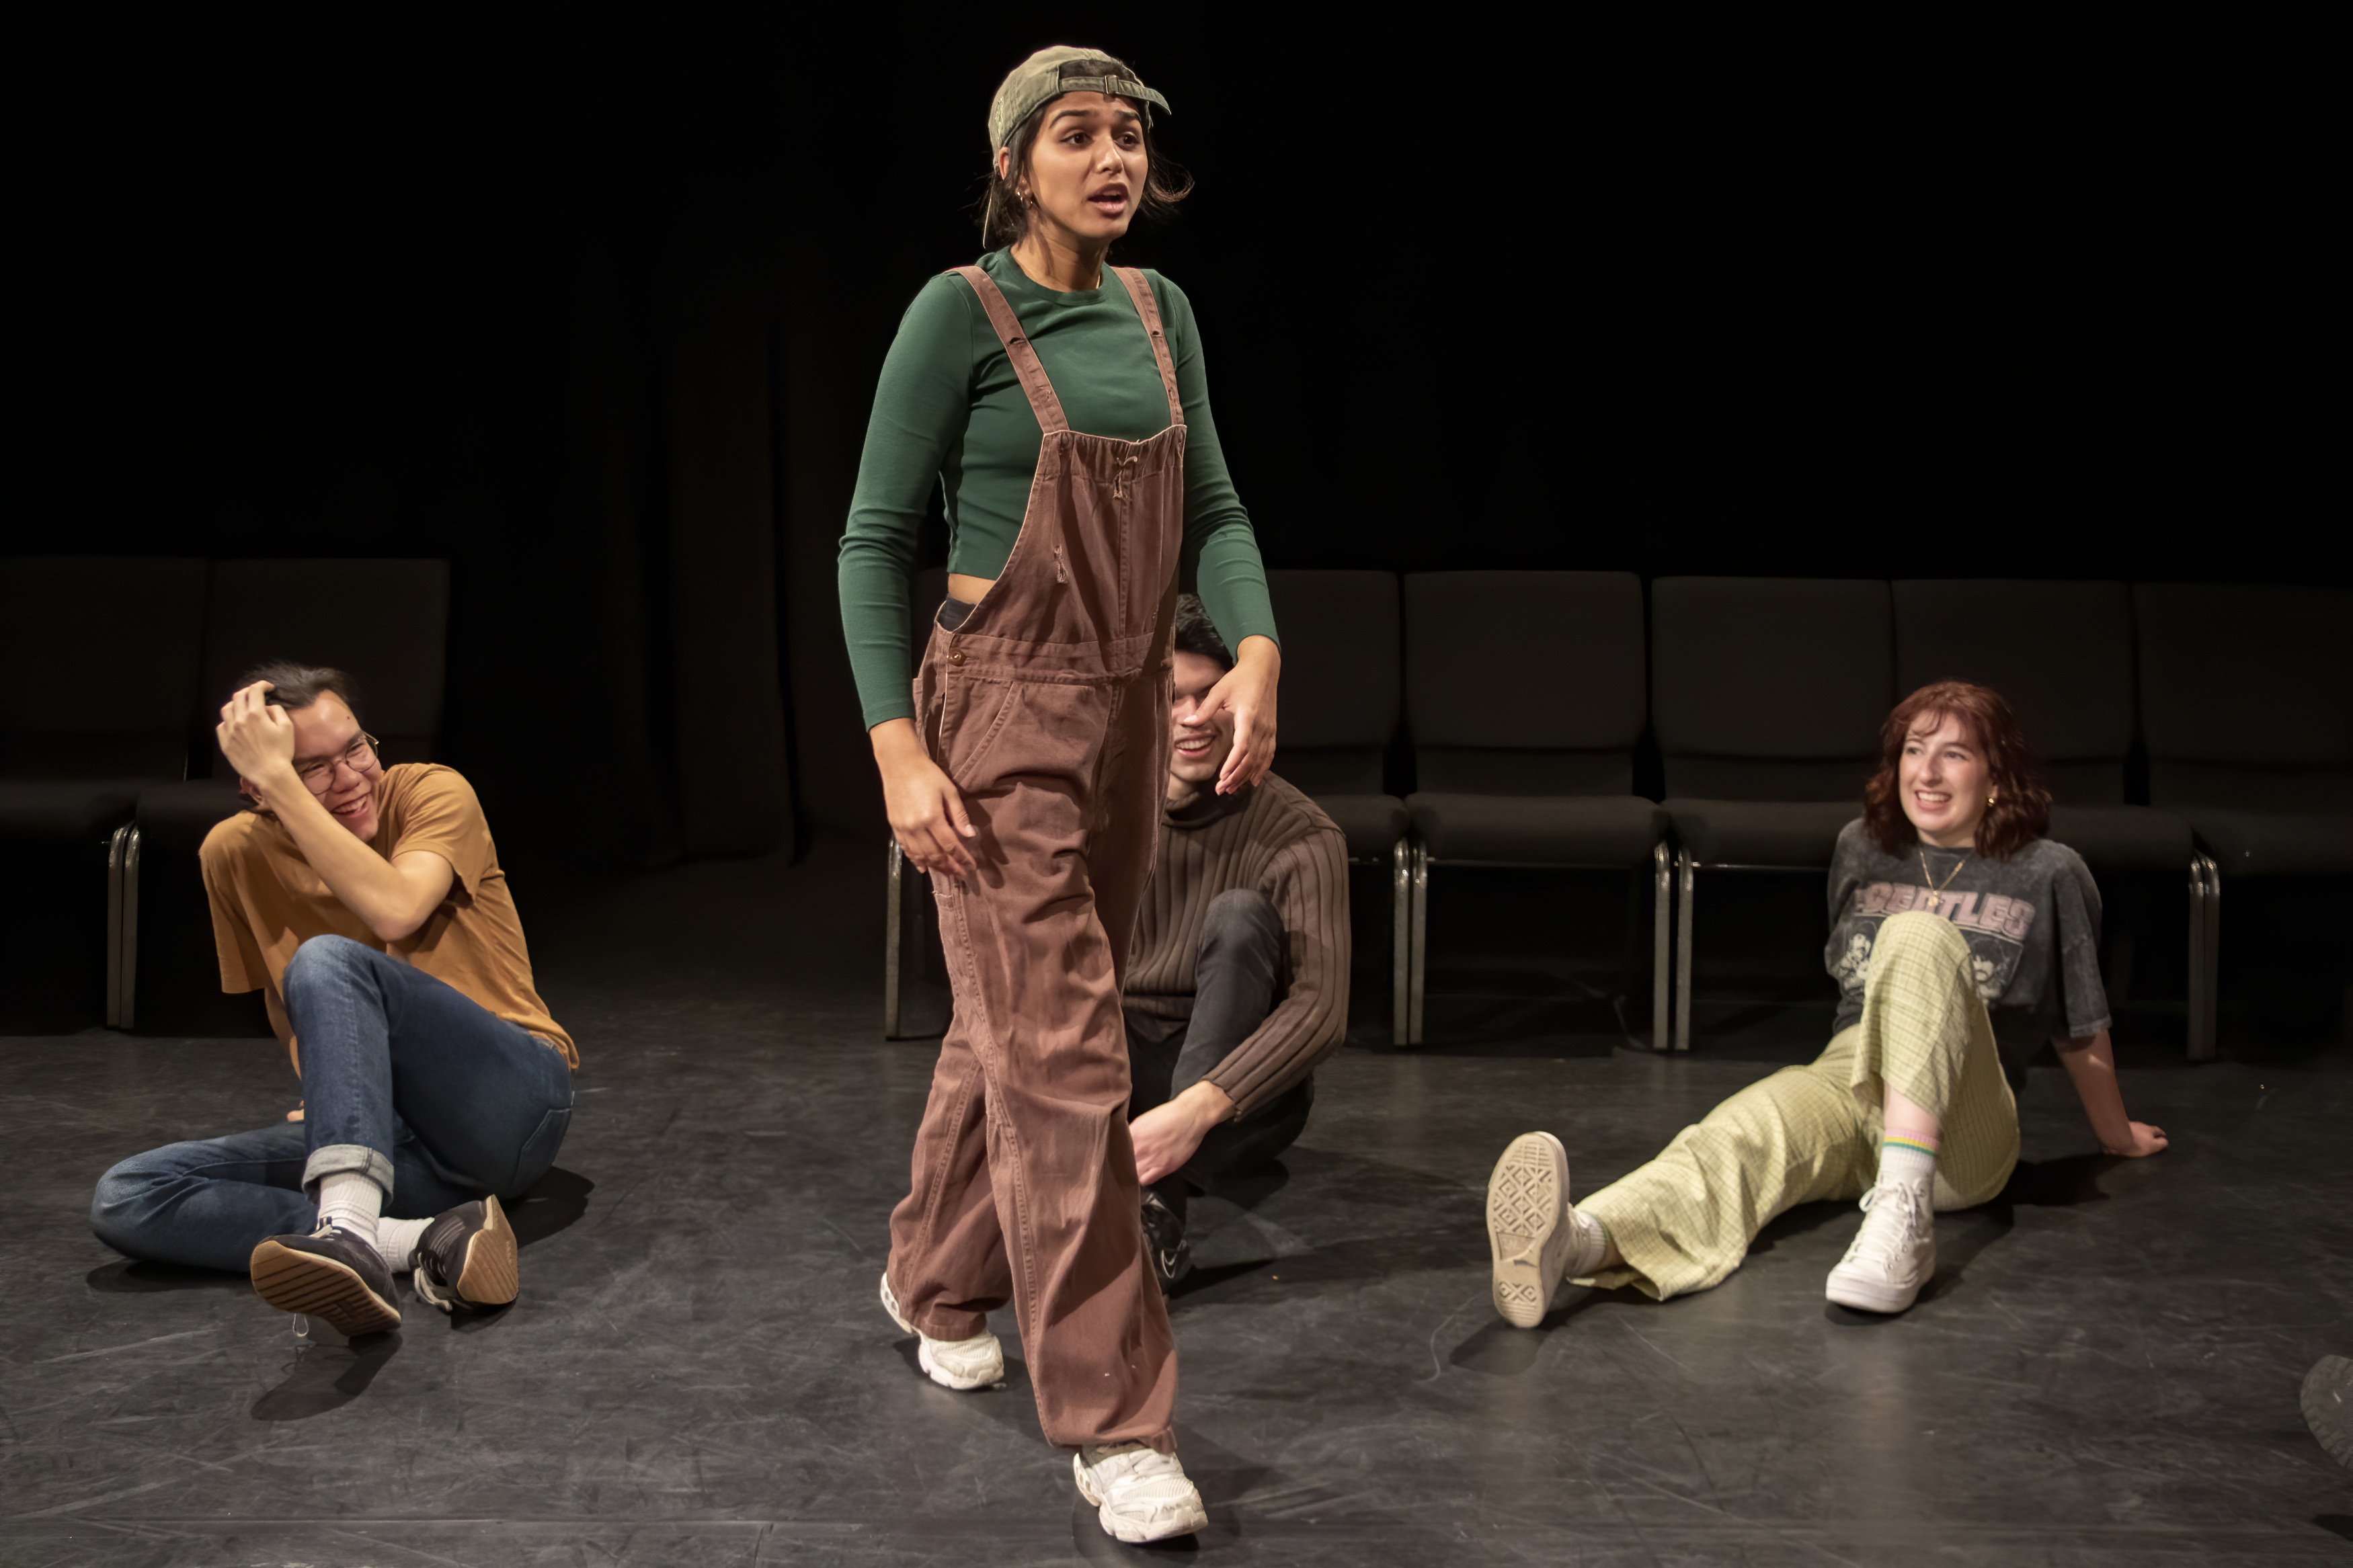 One student walking in mid-performance as other students look at her, seated on the floor of the black box theatre